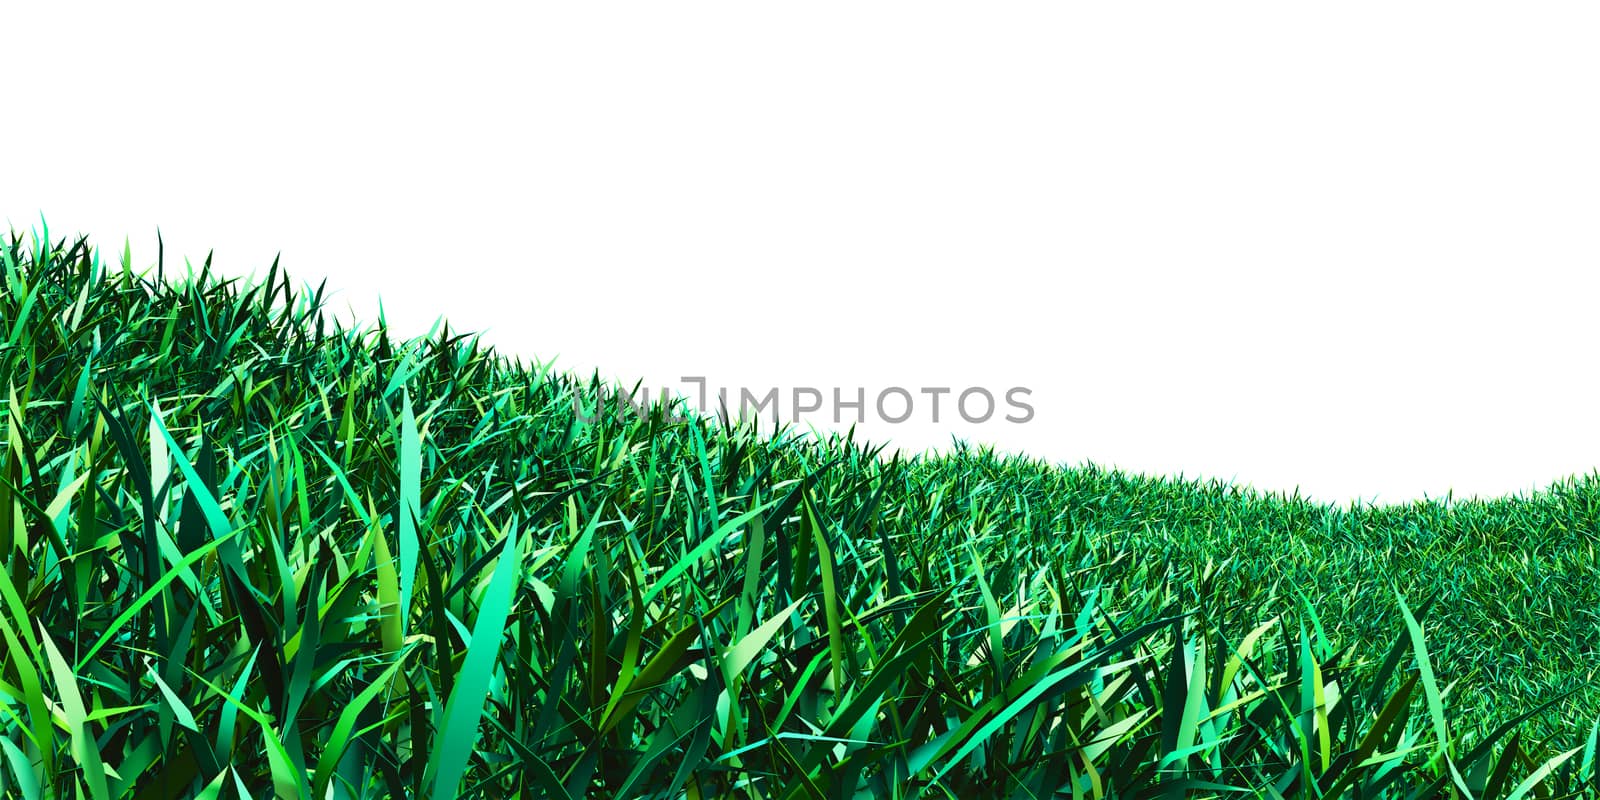 Background image of lush grass field. 3D illustration isolated on white background